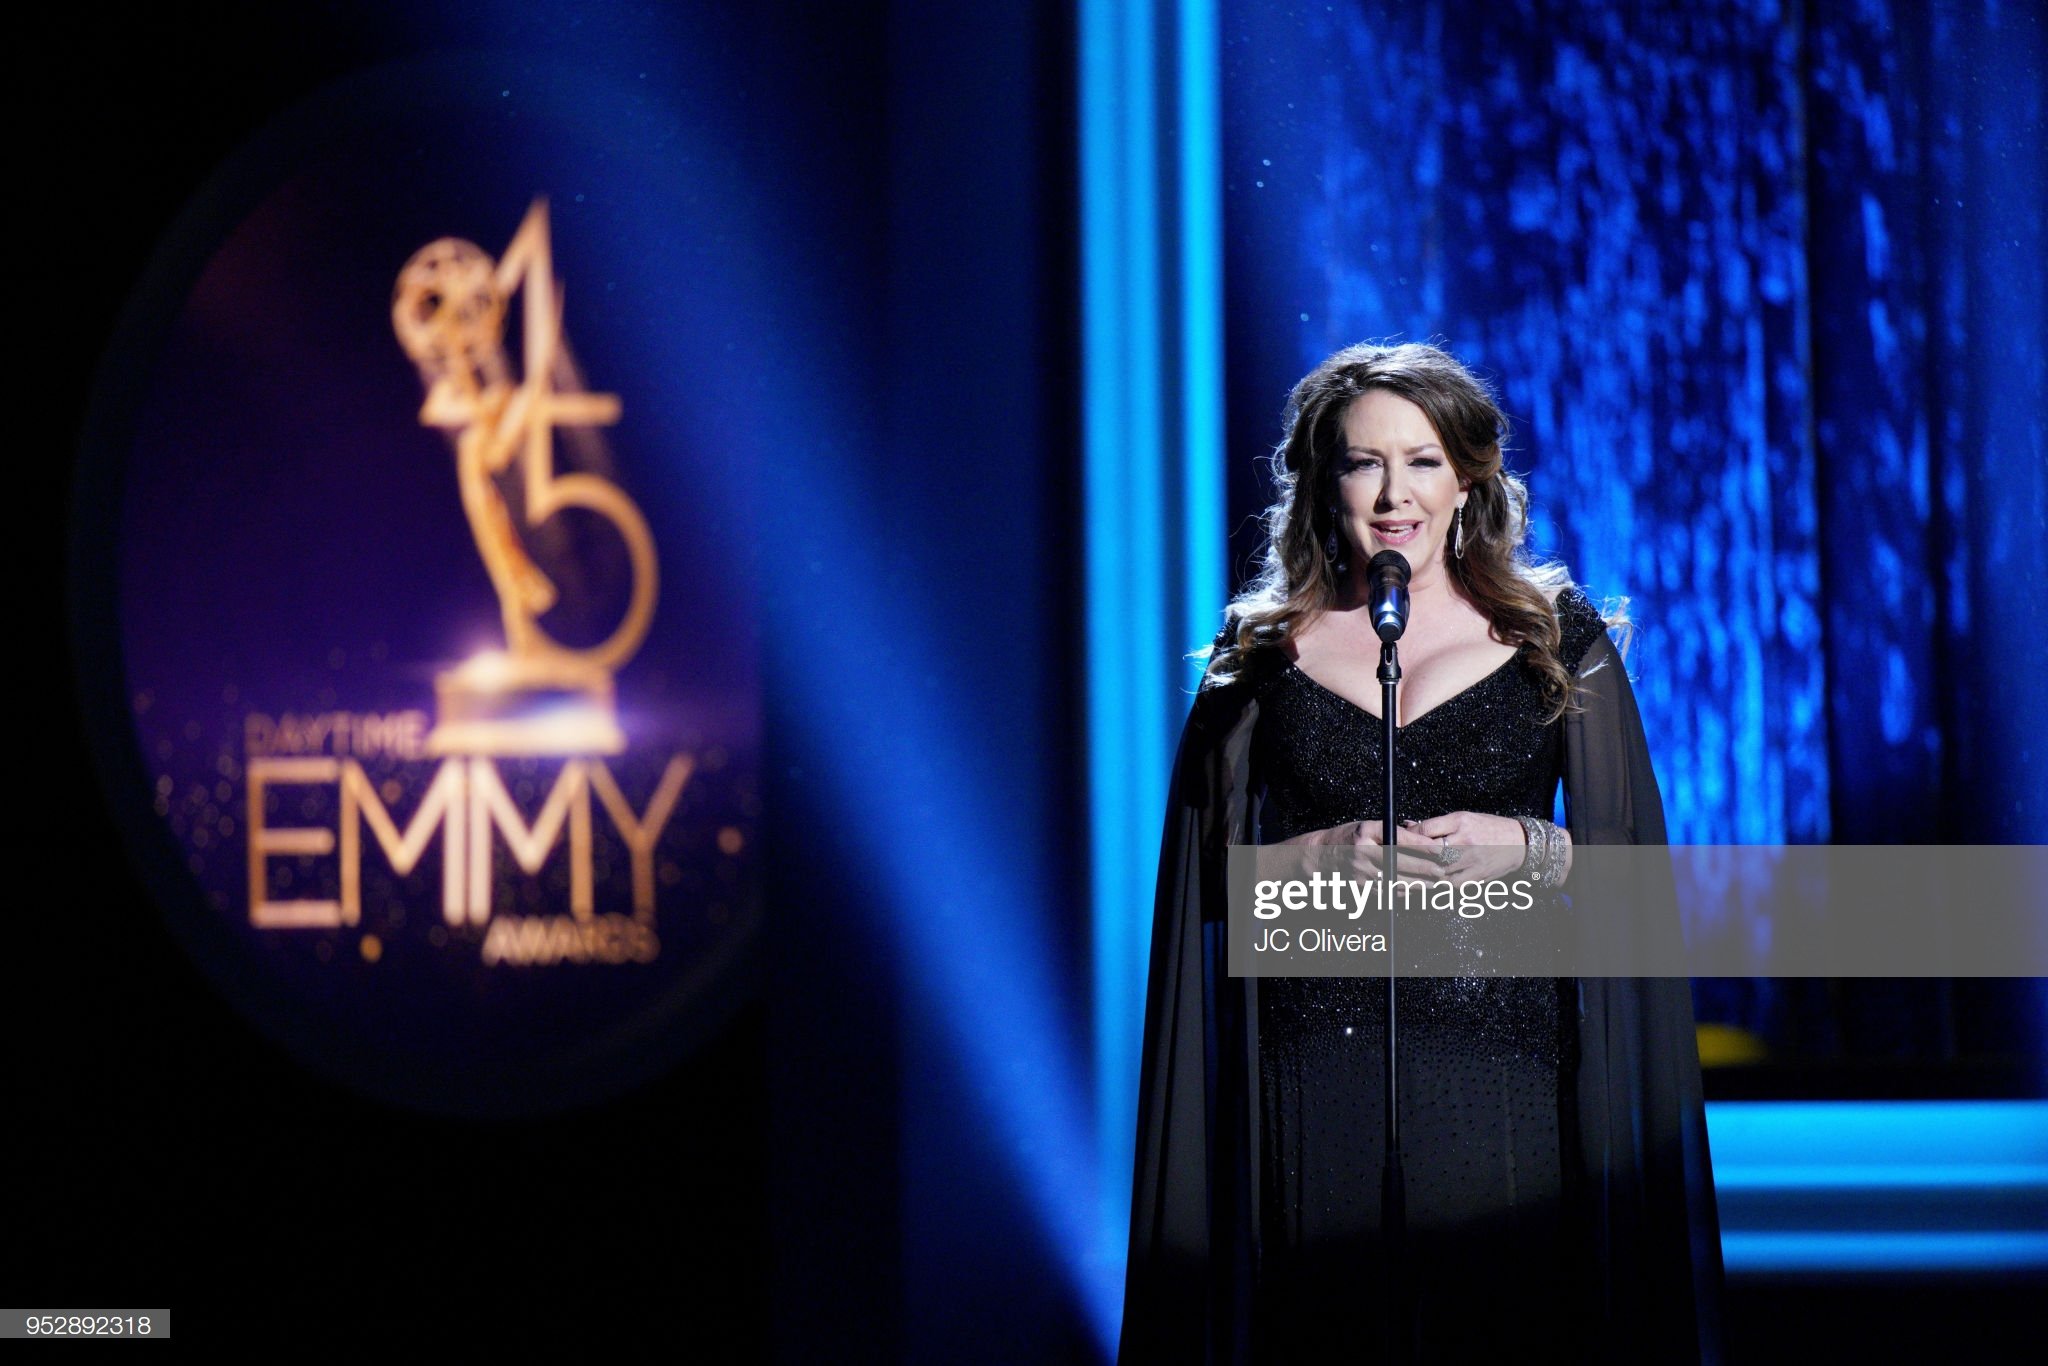  PASADENA, CA - APRIL 29:  Joely Fisher performs onstage during the 45th annual Daytime Emmy Awards at Pasadena Civic Auditorium on April 29, 2018 in Pasadena, California.  (Photo by JC Olivera/WireImage) 